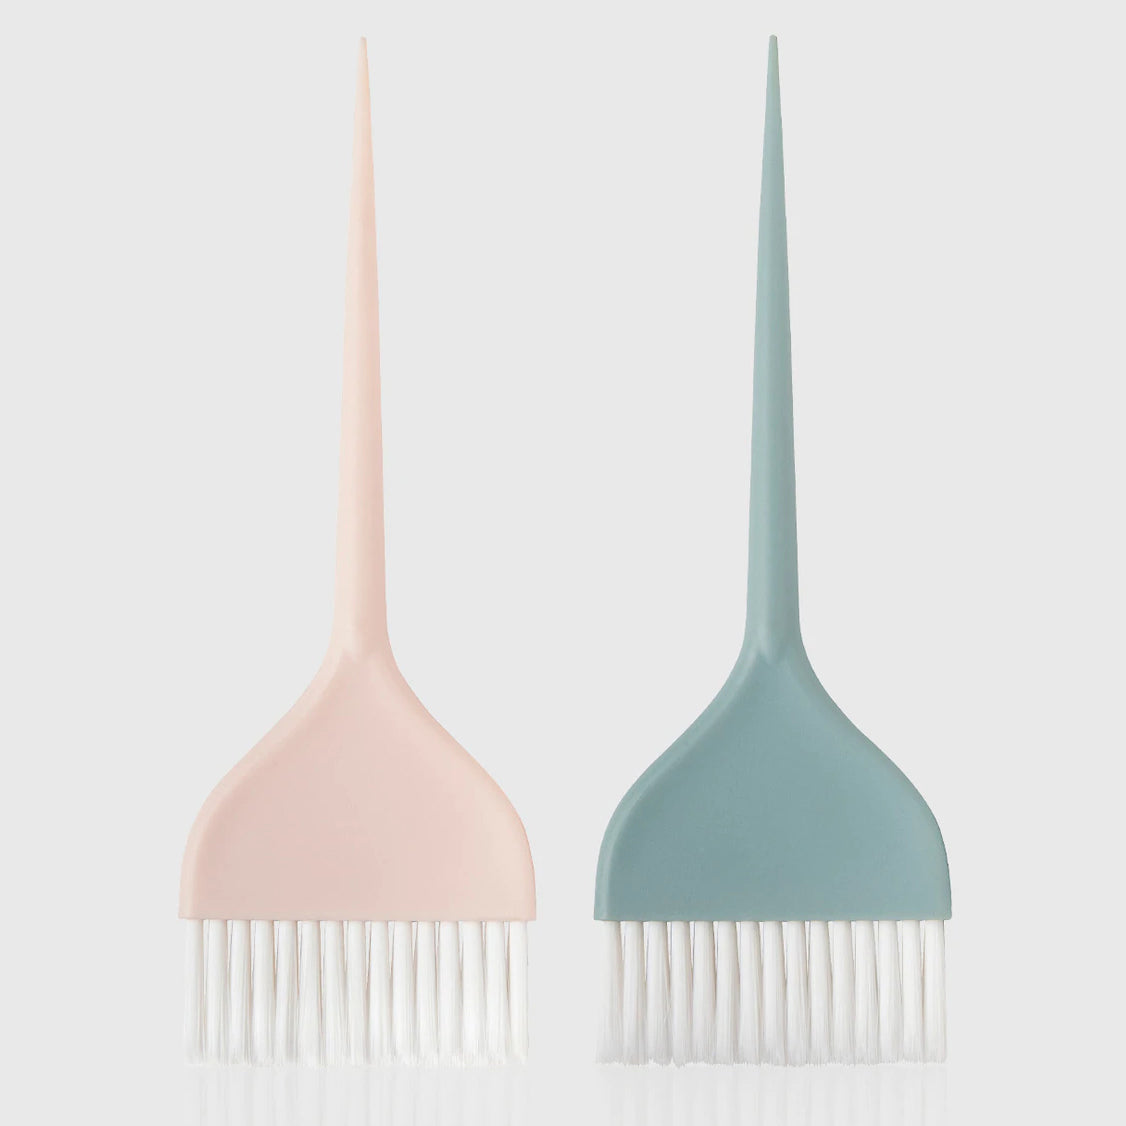 2 7/8" Feather Color Brushes | 2 PACK | F9421 | FROMM HAIR COLORING ACCESSORIES FROMM 